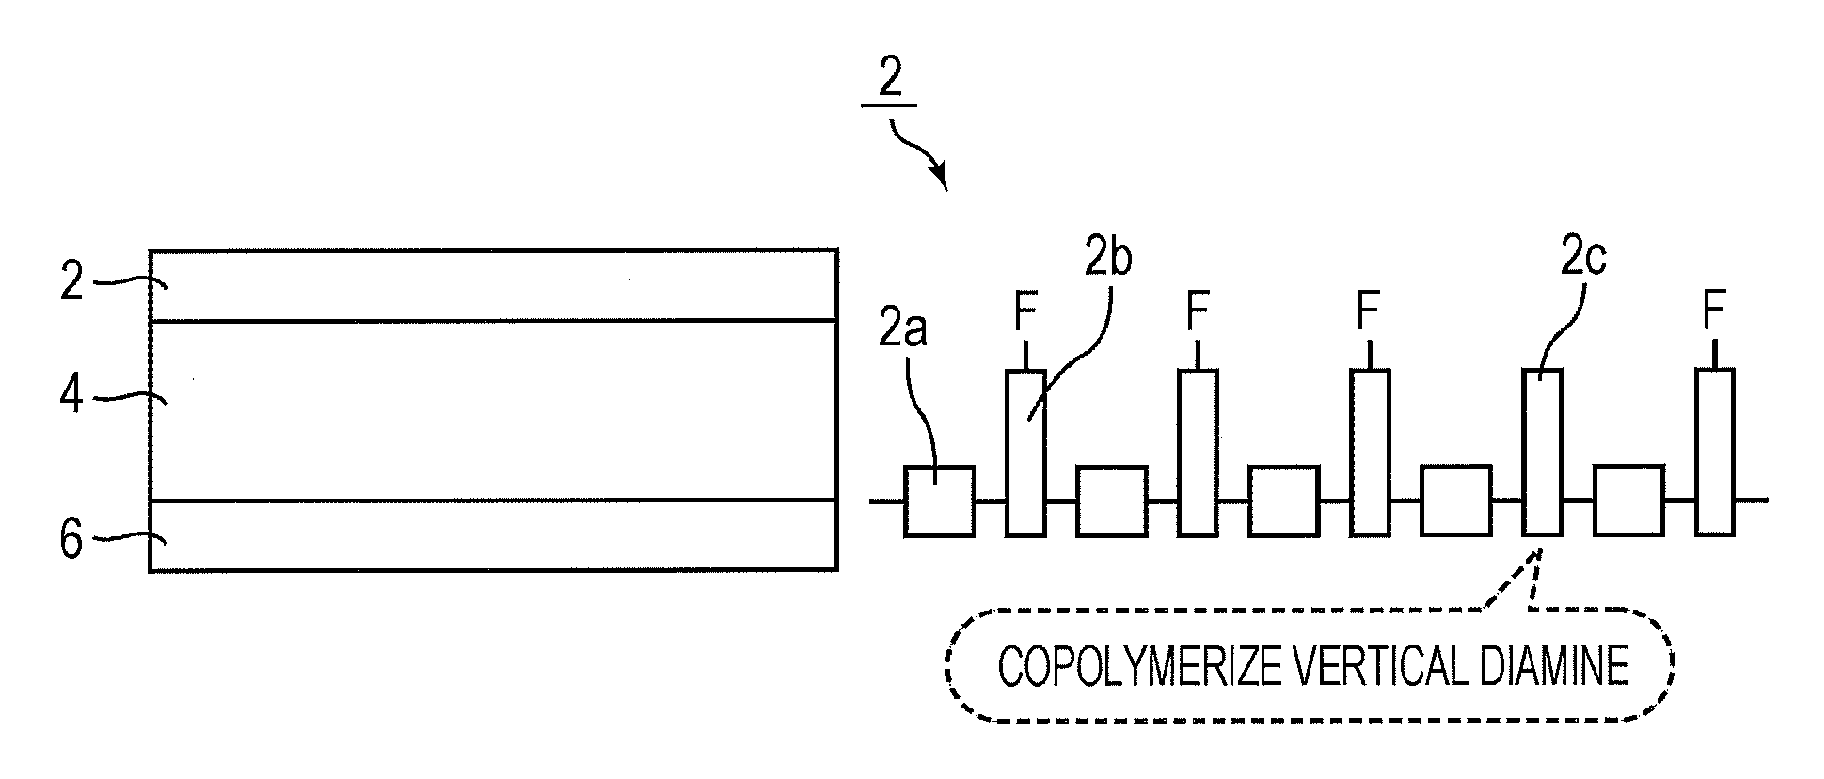 Liquid crystal display panel, liquid crystal display device, and polymer for alignment film material